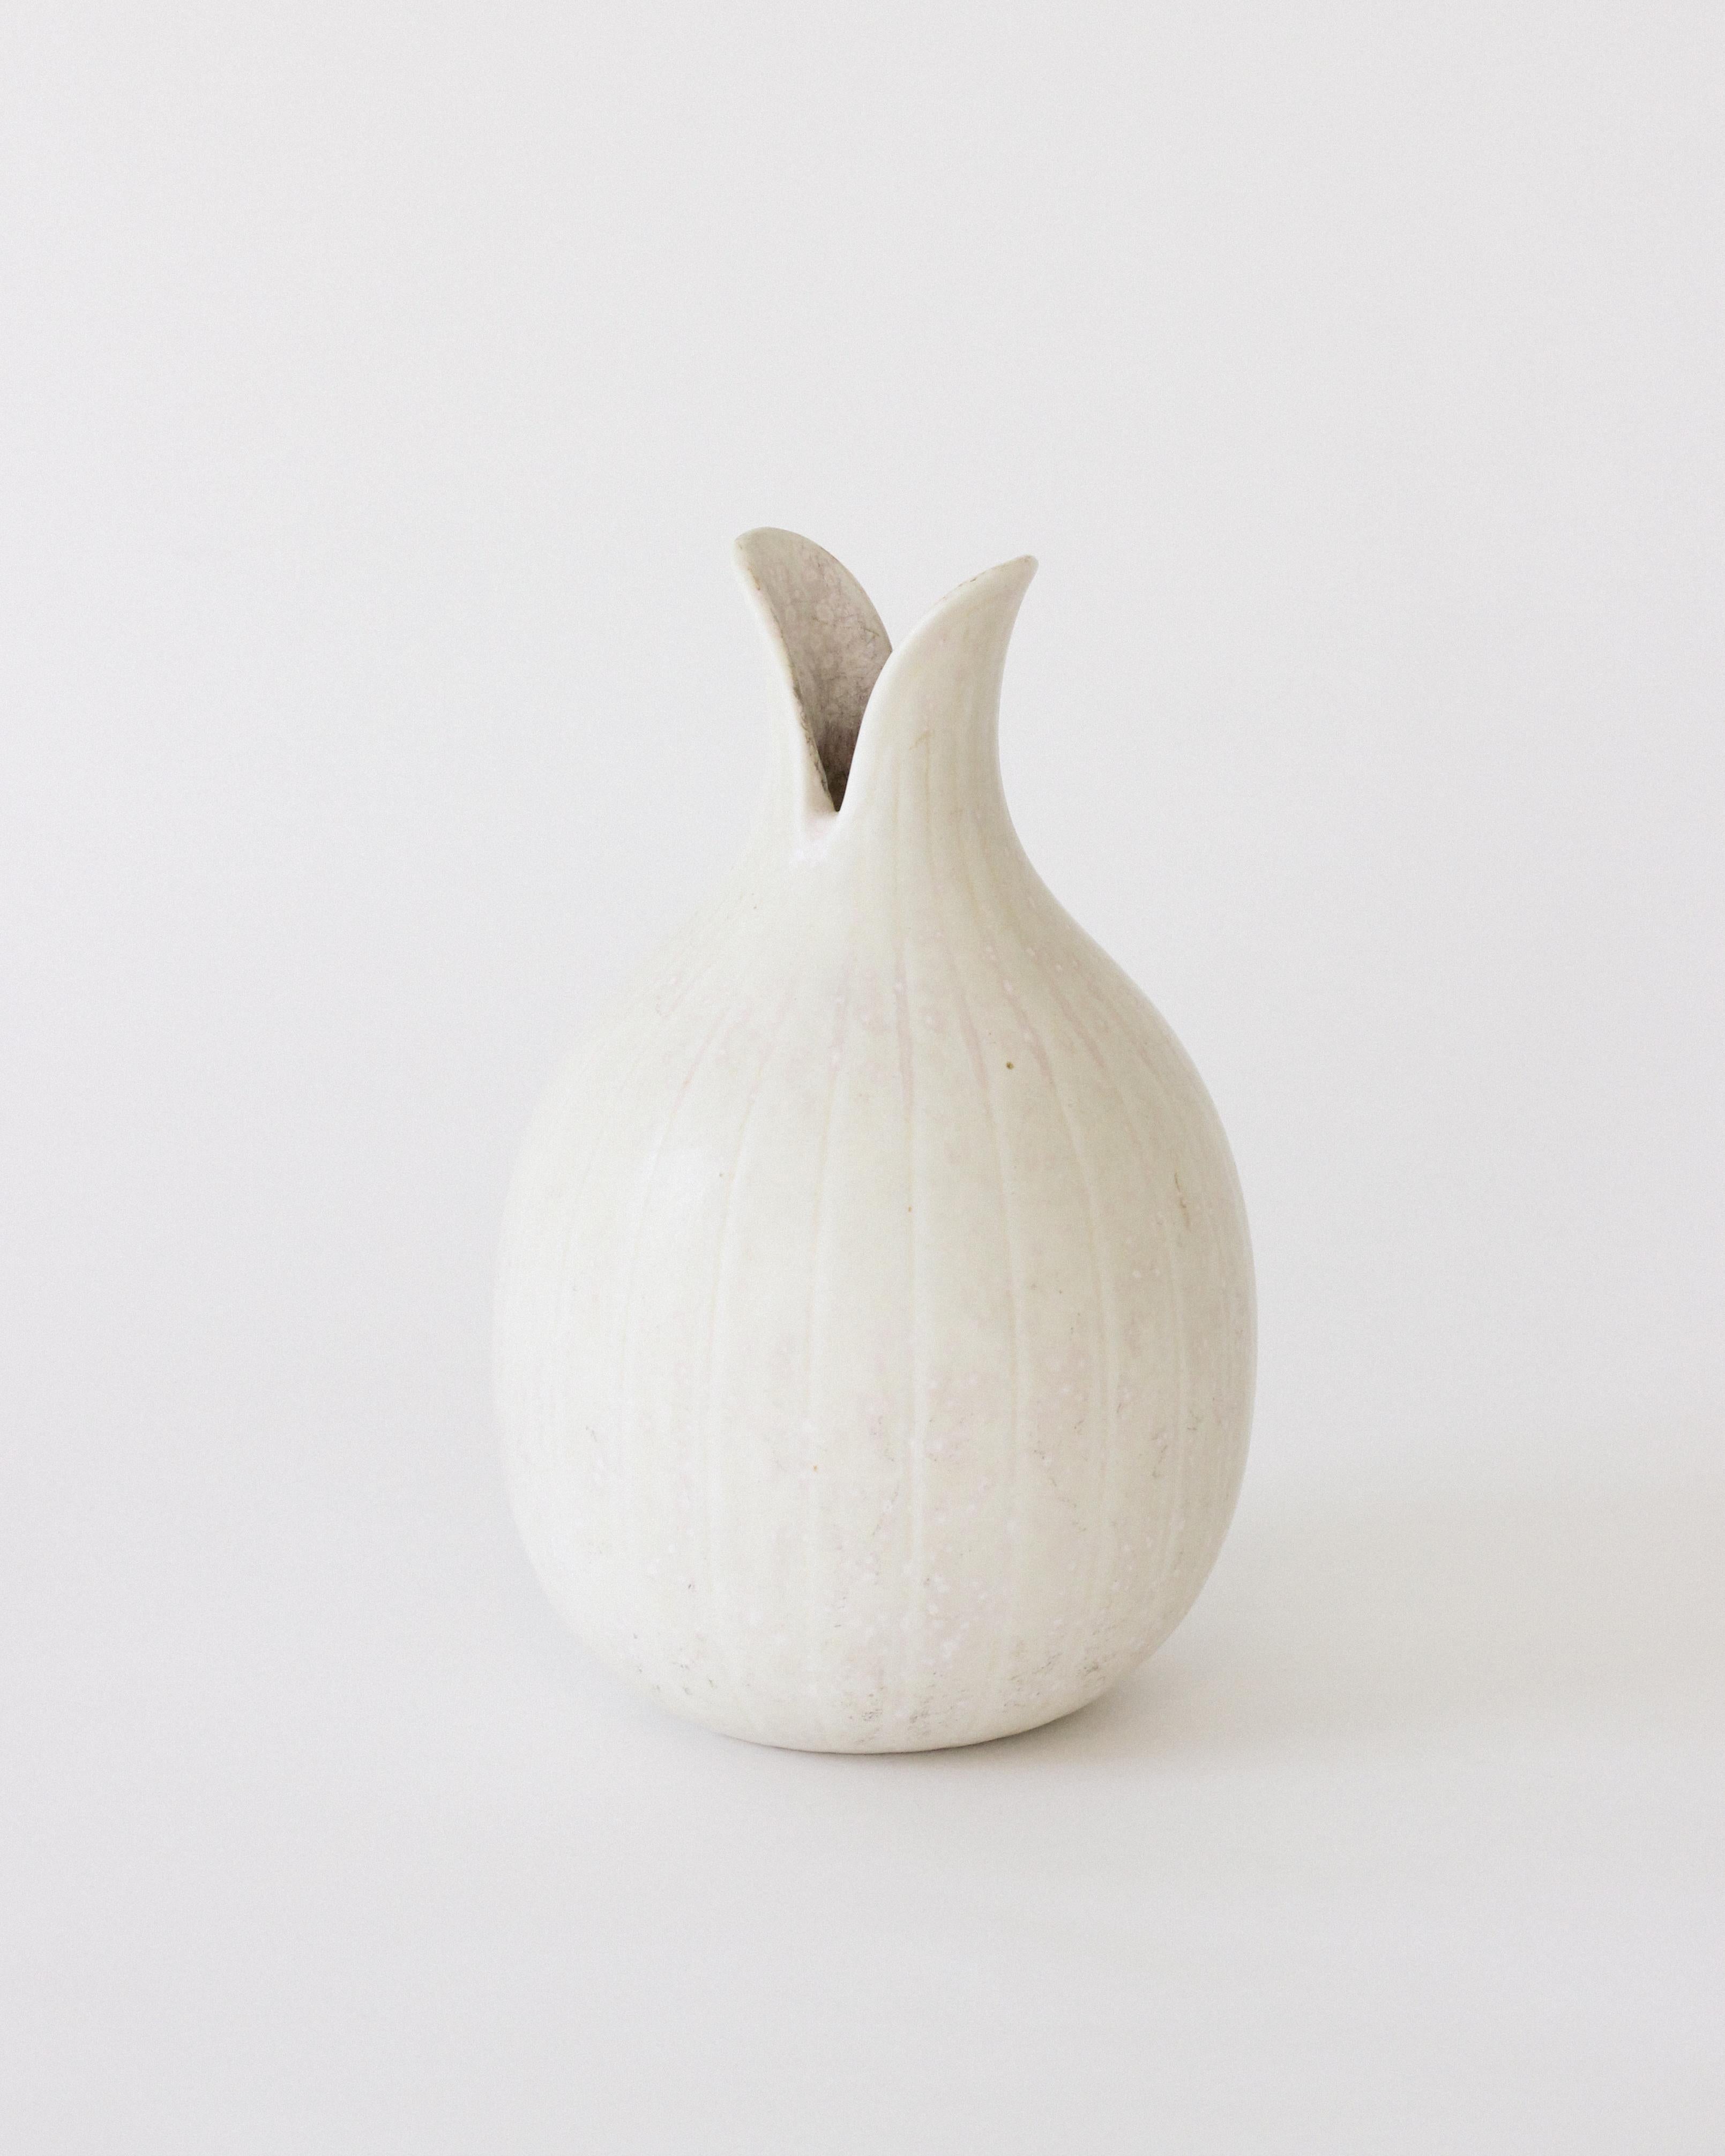 An exceptional vase by Swedish ceramicist Gunnar Nylund for Rörstrand 

Sweden, 1950's 

Rare example with eggshell glaze, marked 'ARM' and signed Gunnar Nylund.

Gunnar Nylund (1904-1997) is one of the most well-known representatives of the